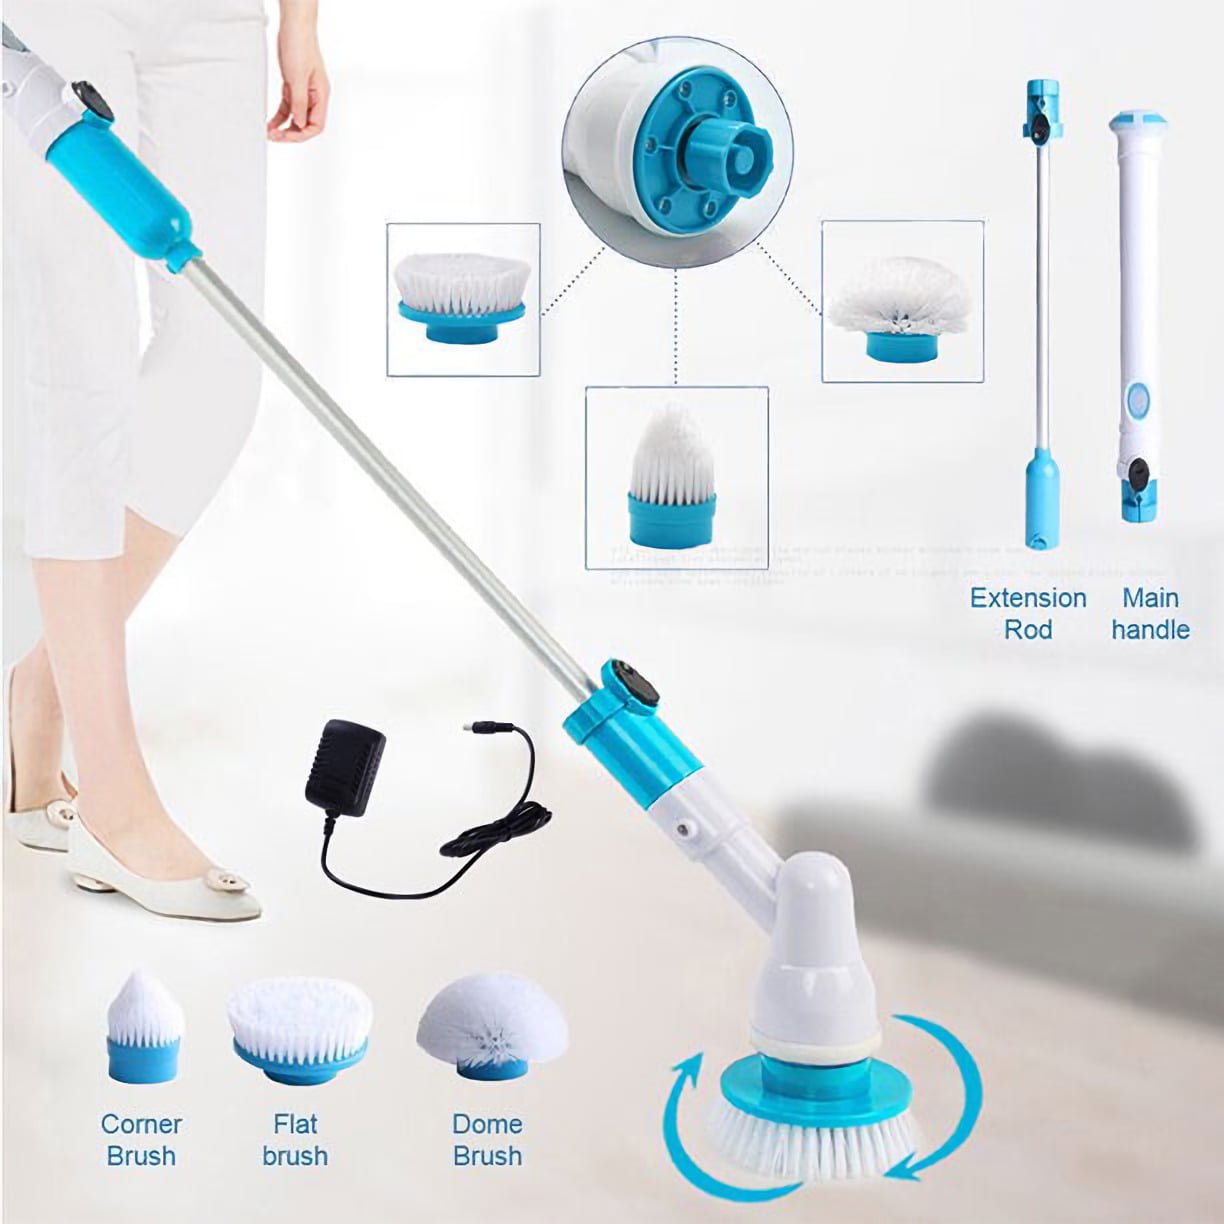 Chargeable Bathroom Cleaner with Extension Handle Adaptive Brush Tub Tile Tools.